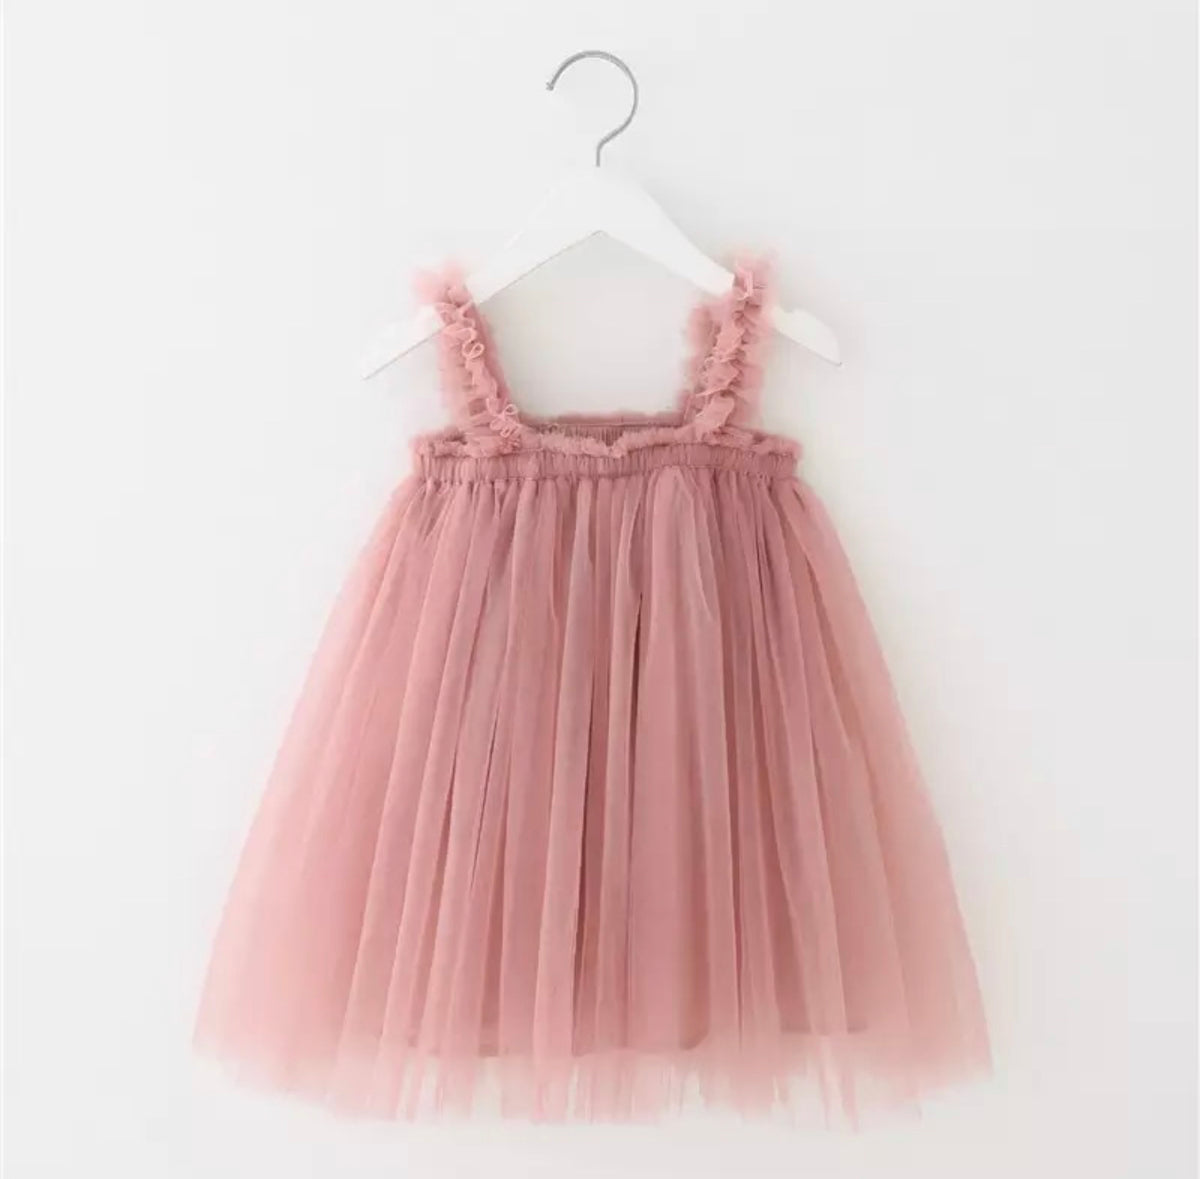 Tulle Dreams Dress in Rose Pink